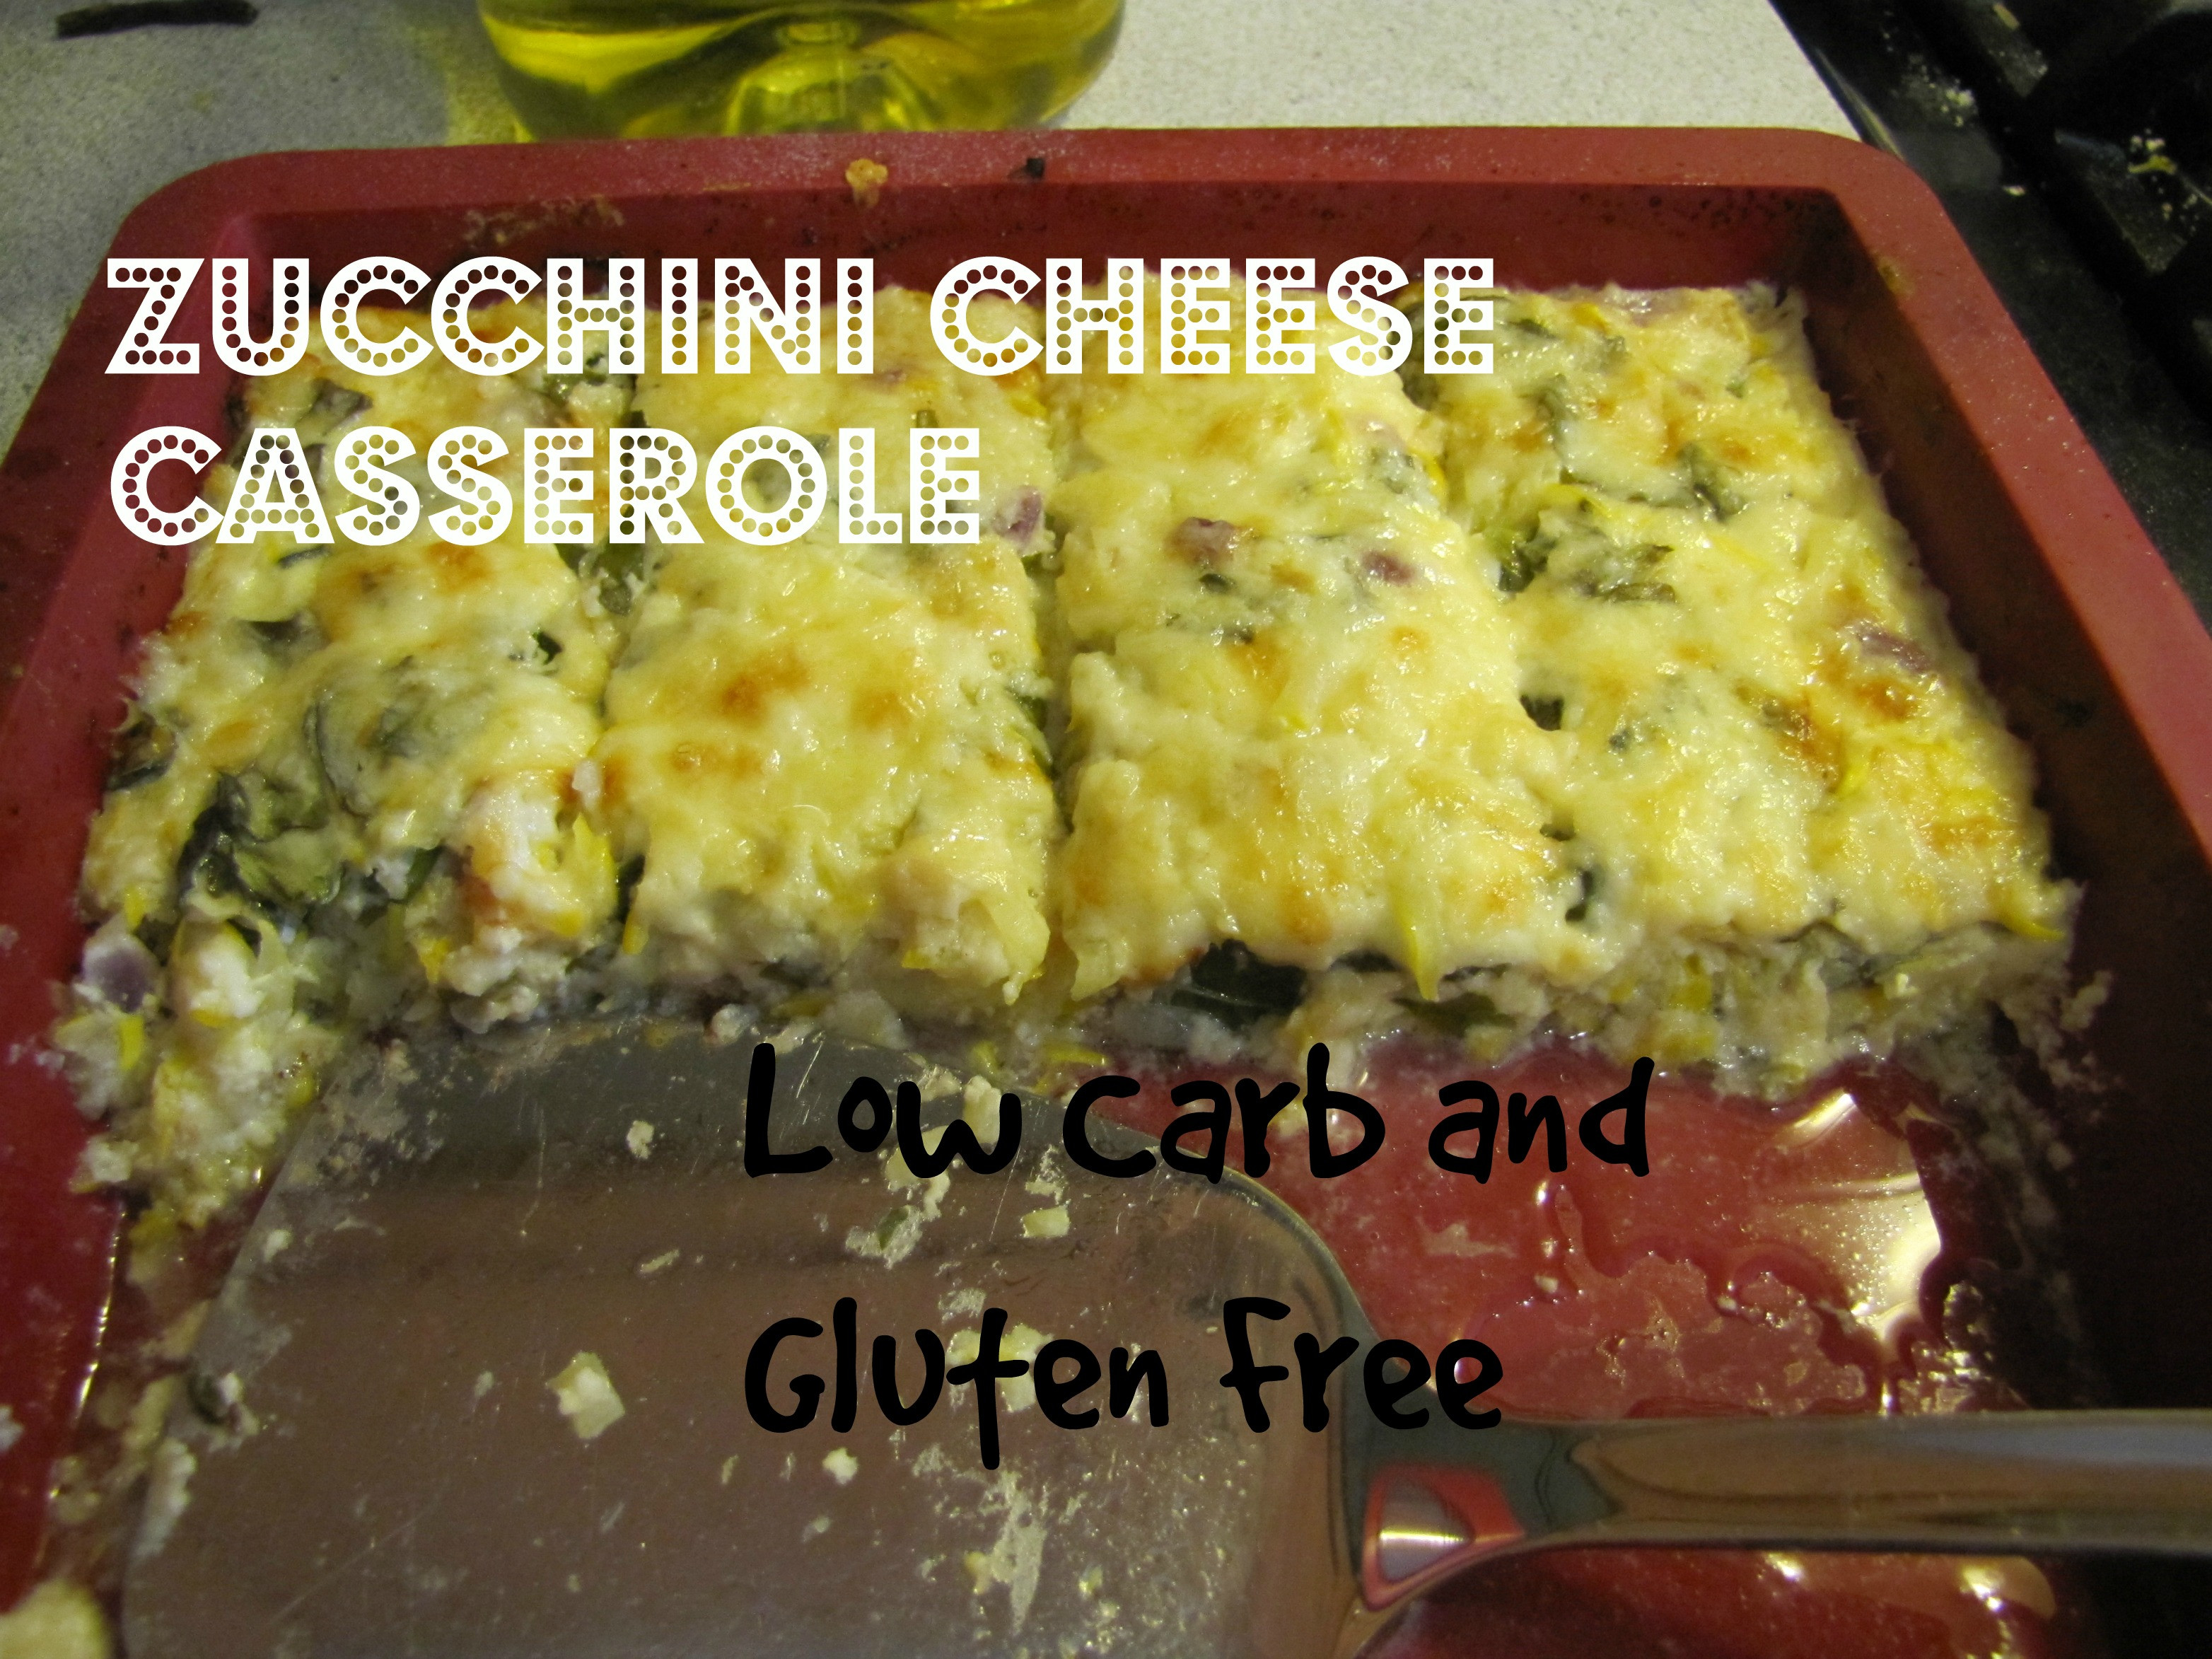 Low Carb Zucchini Recipes
 Zucchini Cheese Casserole Low Carb and Gluten Free